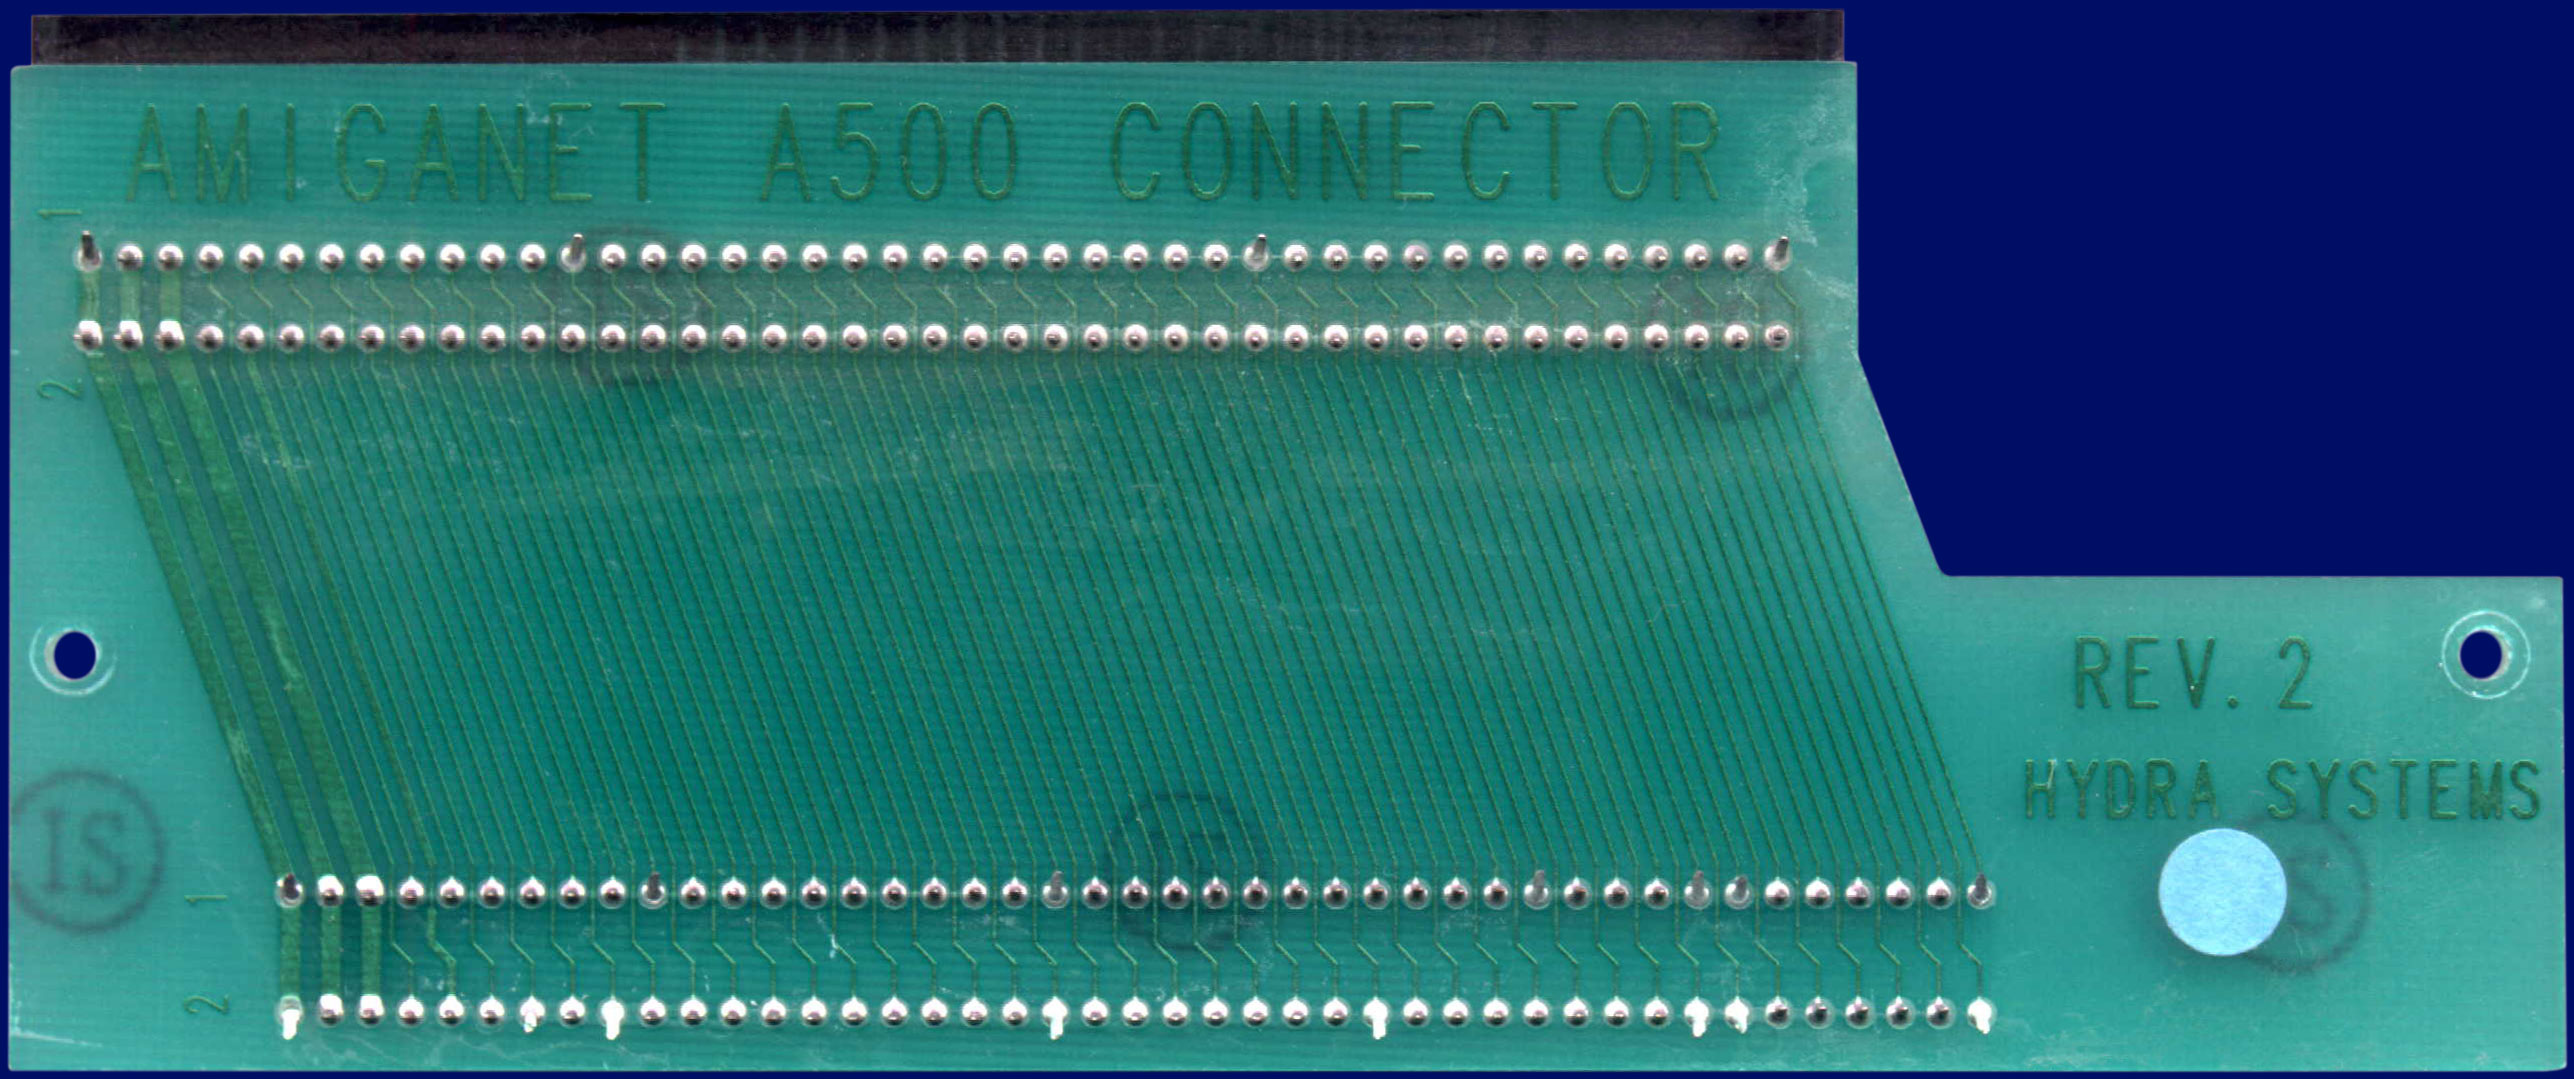 Hydra Systems AmigaNet 500 - Connector board, back side